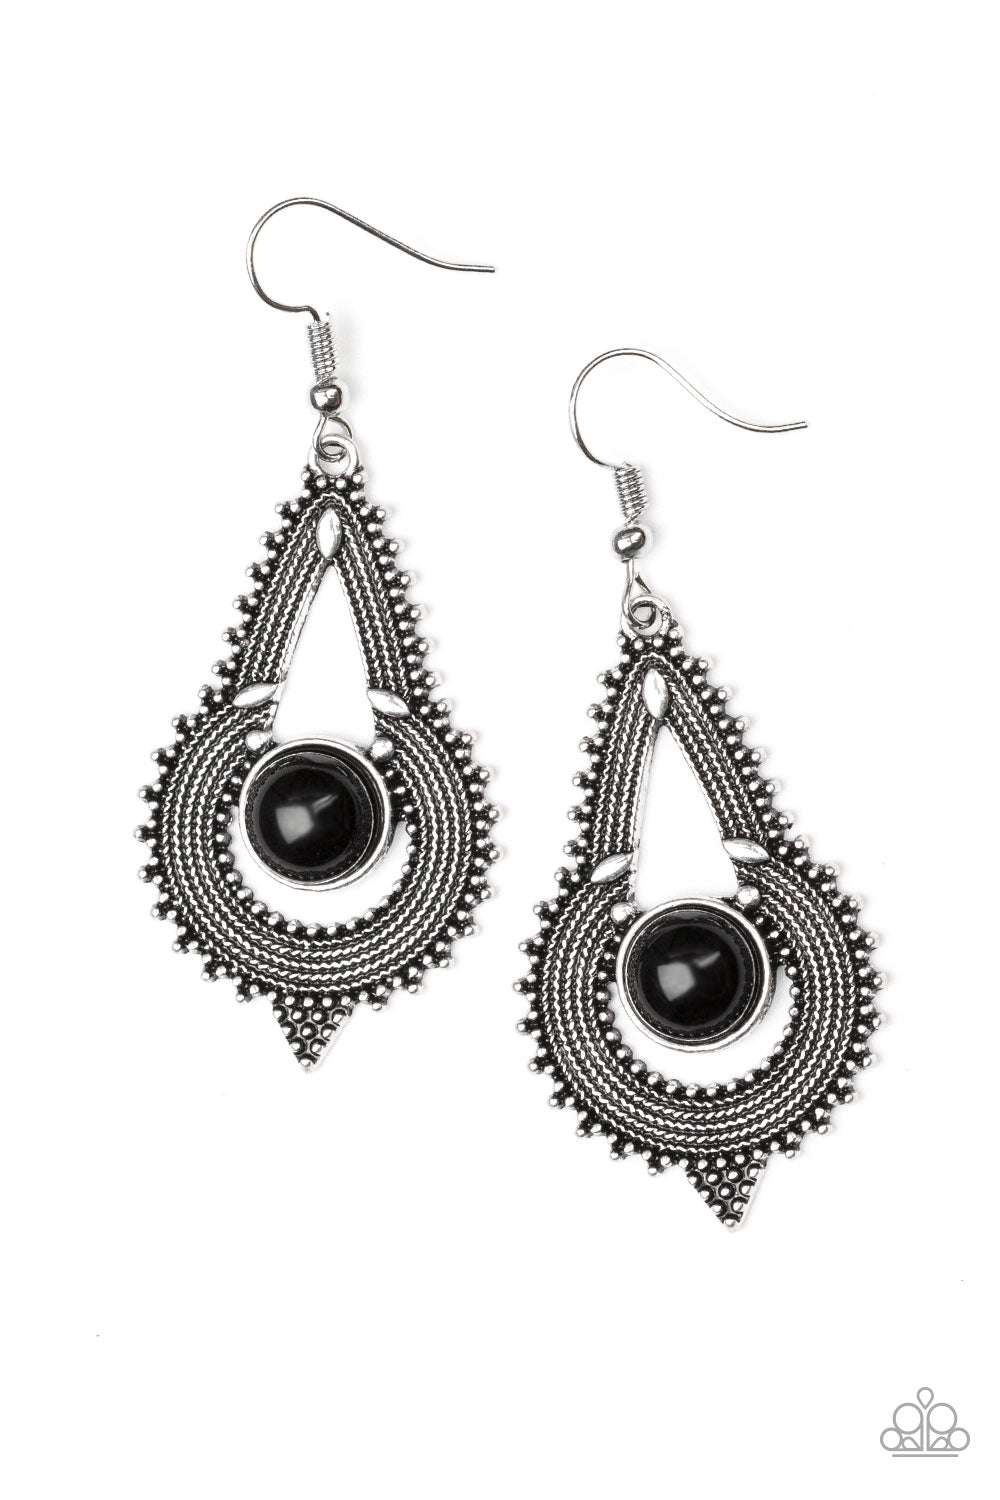 Radiating with studded and rope-like textures, an ornate silver frame joins around a polished black beaded center for a seasonal look. Earring attaches to a standard fishhook fitting.